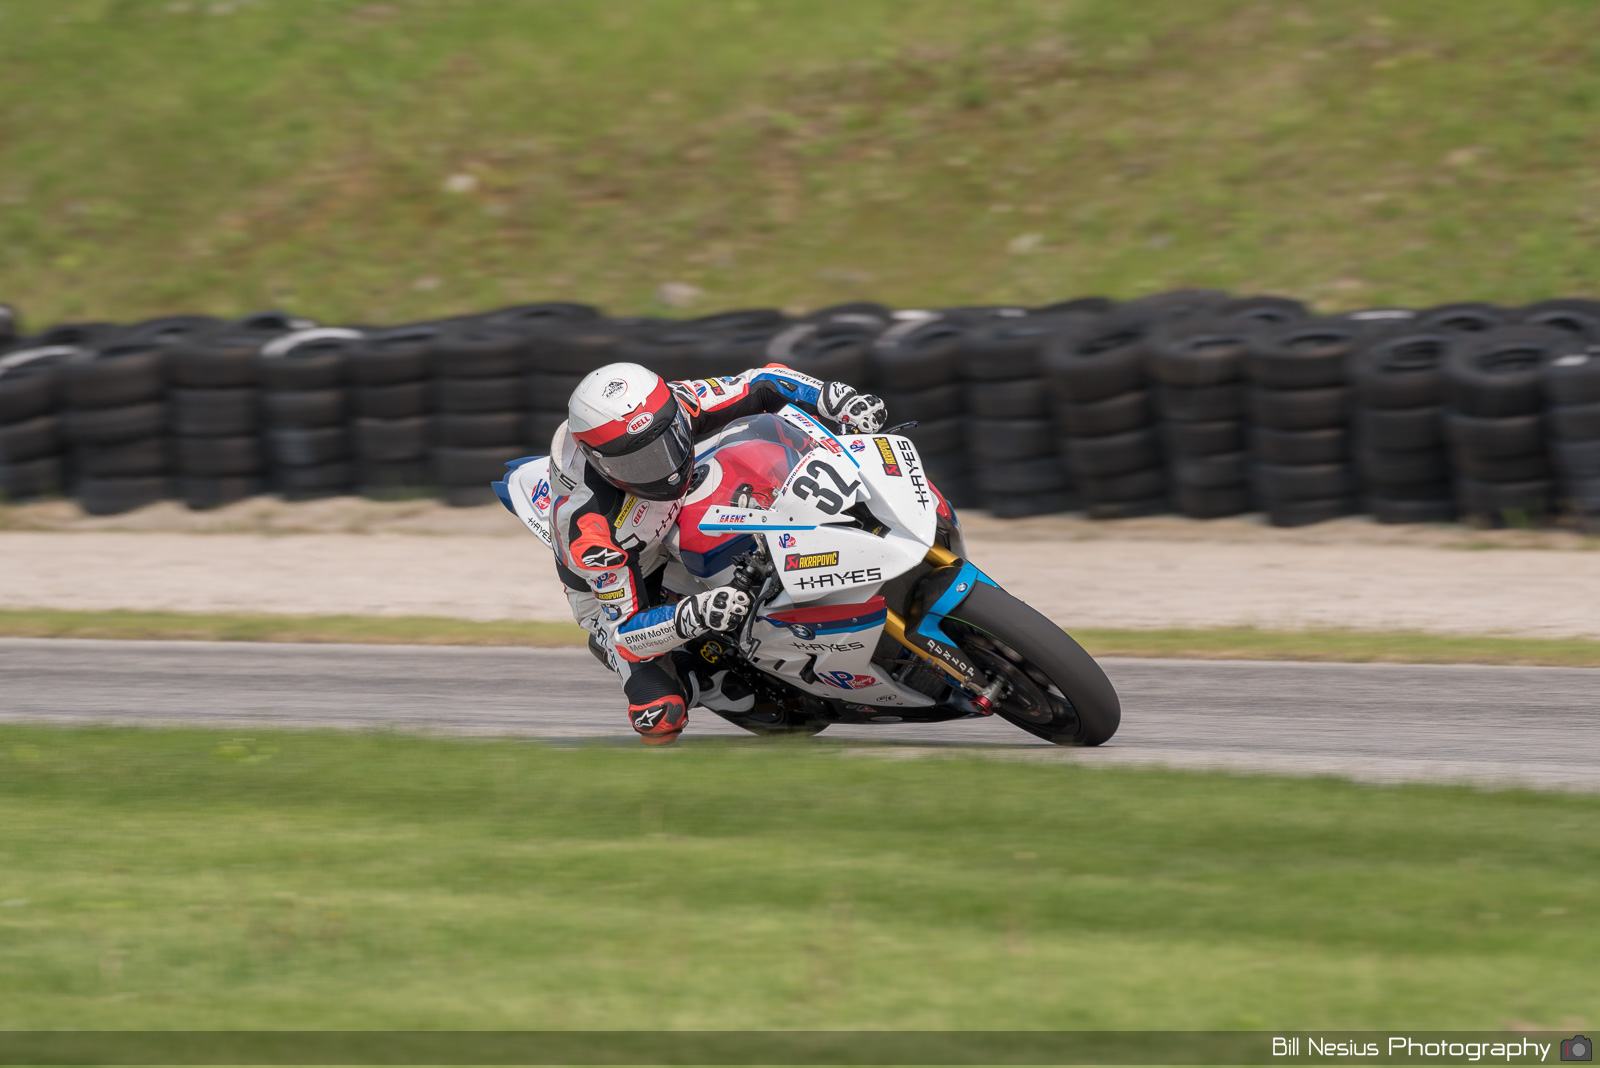 Jake Gagne on the Number 32 Scheibe Racing BMW S100RR / DSC_8340 / 4